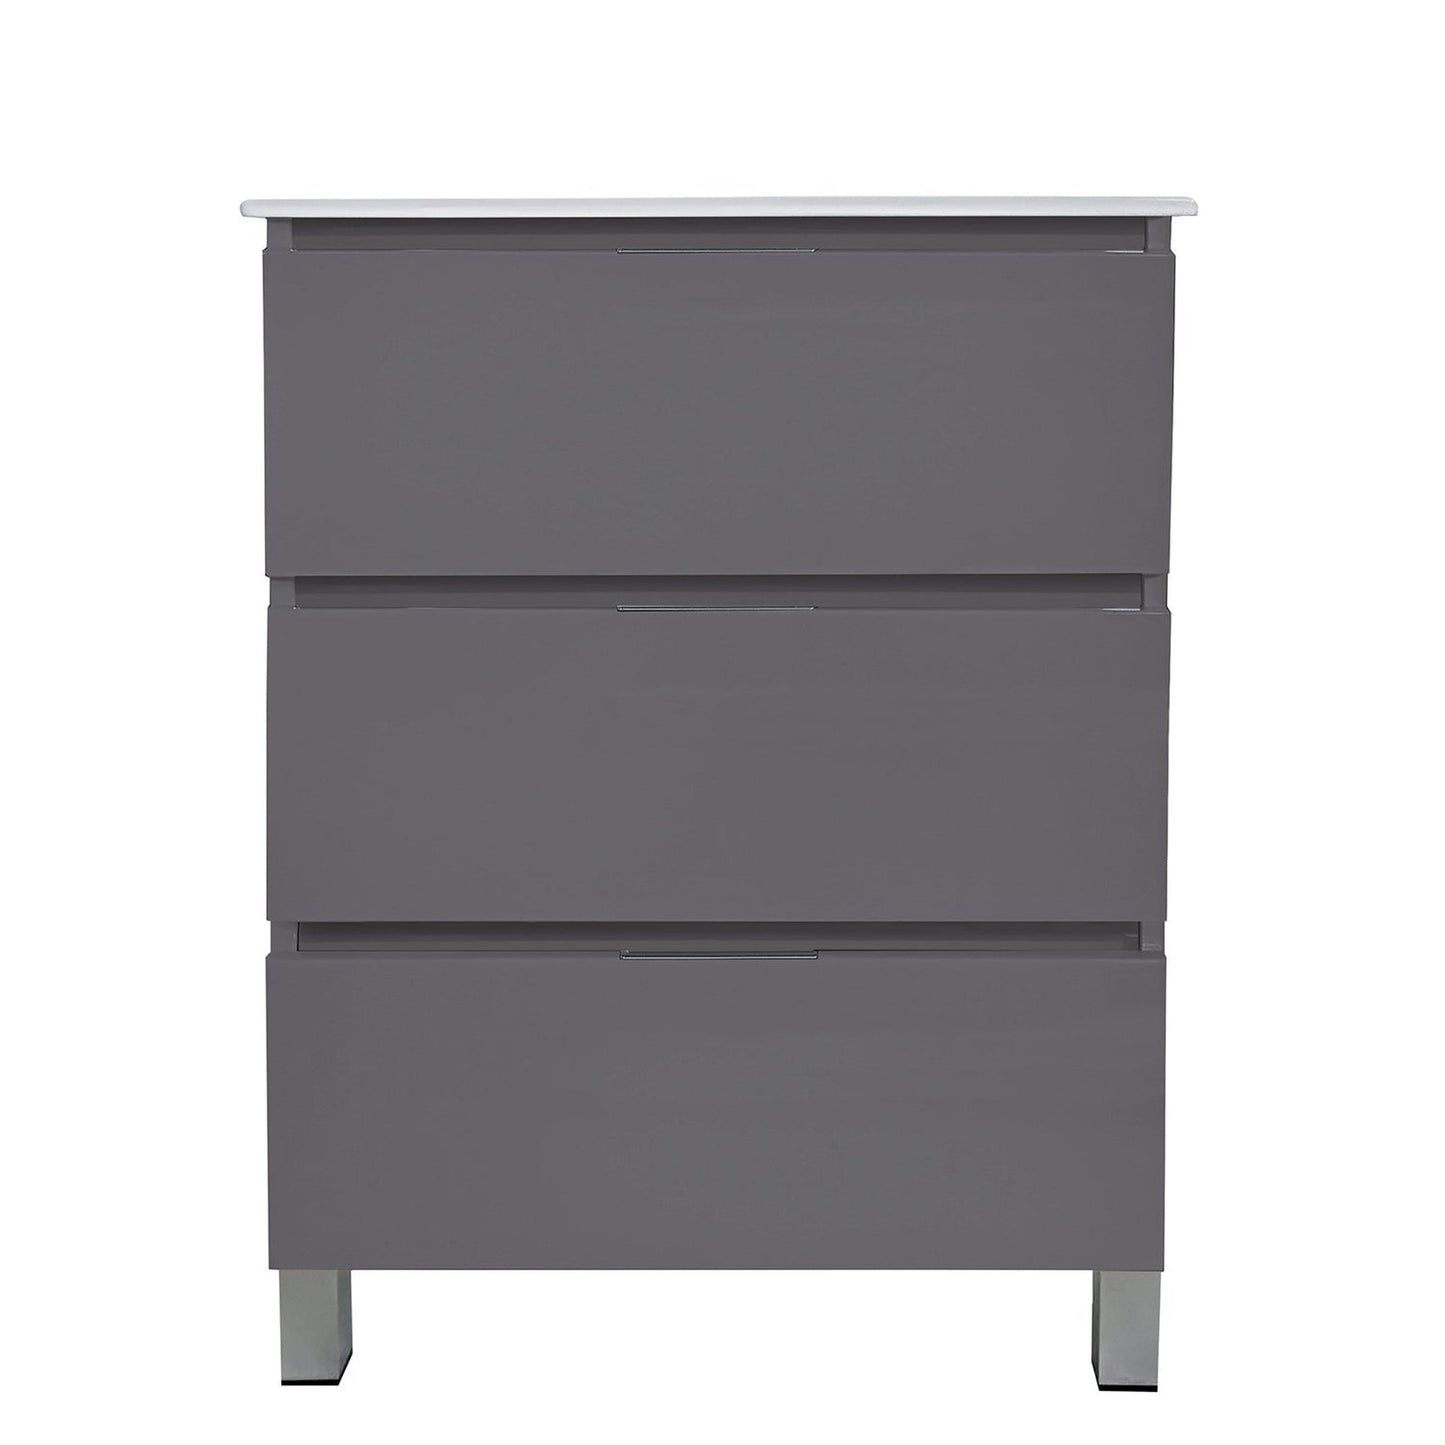 Eviva Malmo 24" x 34" Gray Freestanding Bathroom Vanity With White Porcelain Integrated Sink